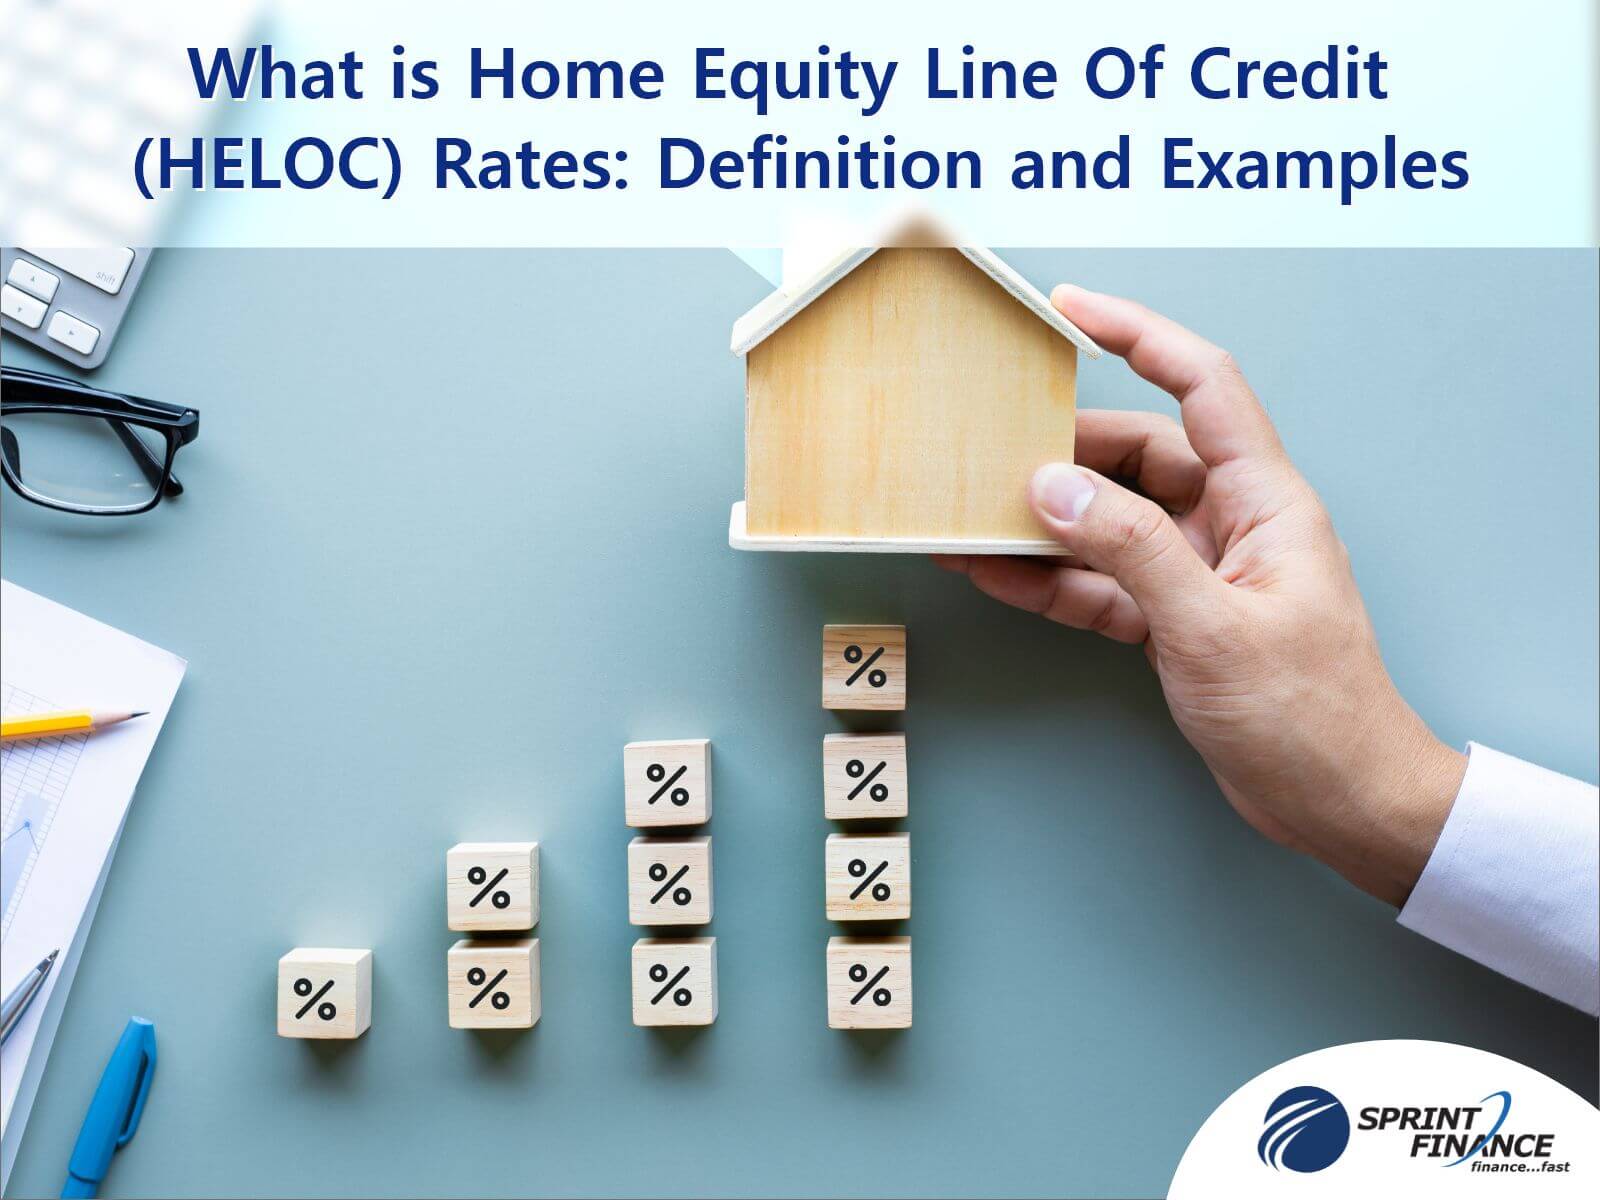 What is Home Equity Line Of Credit (HELOC) Rates Definition and